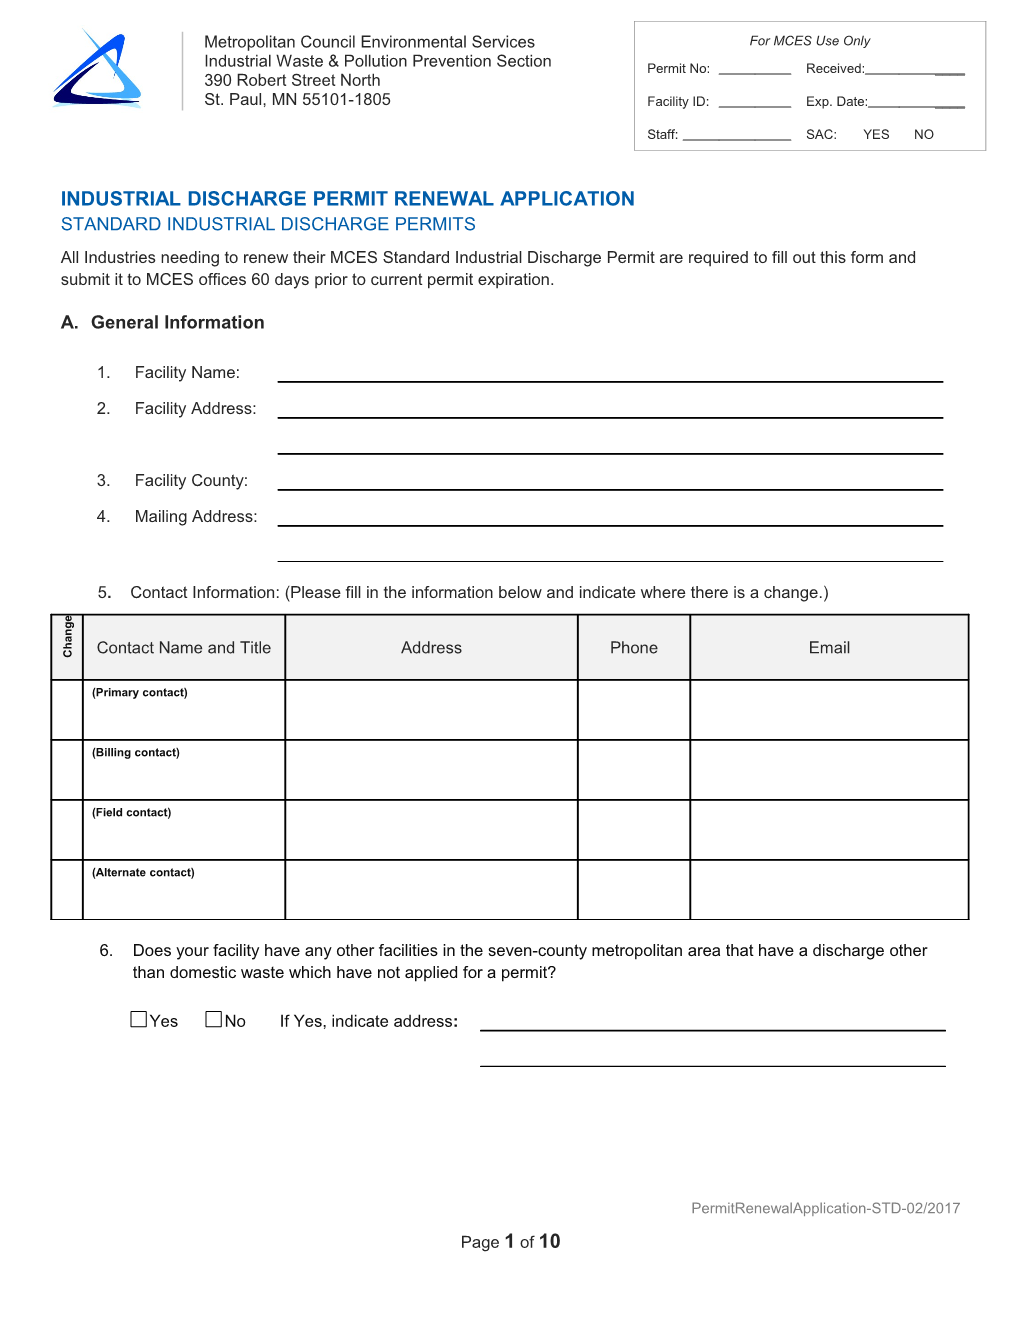 MCES Industrial Discharge Permit Renewal Application